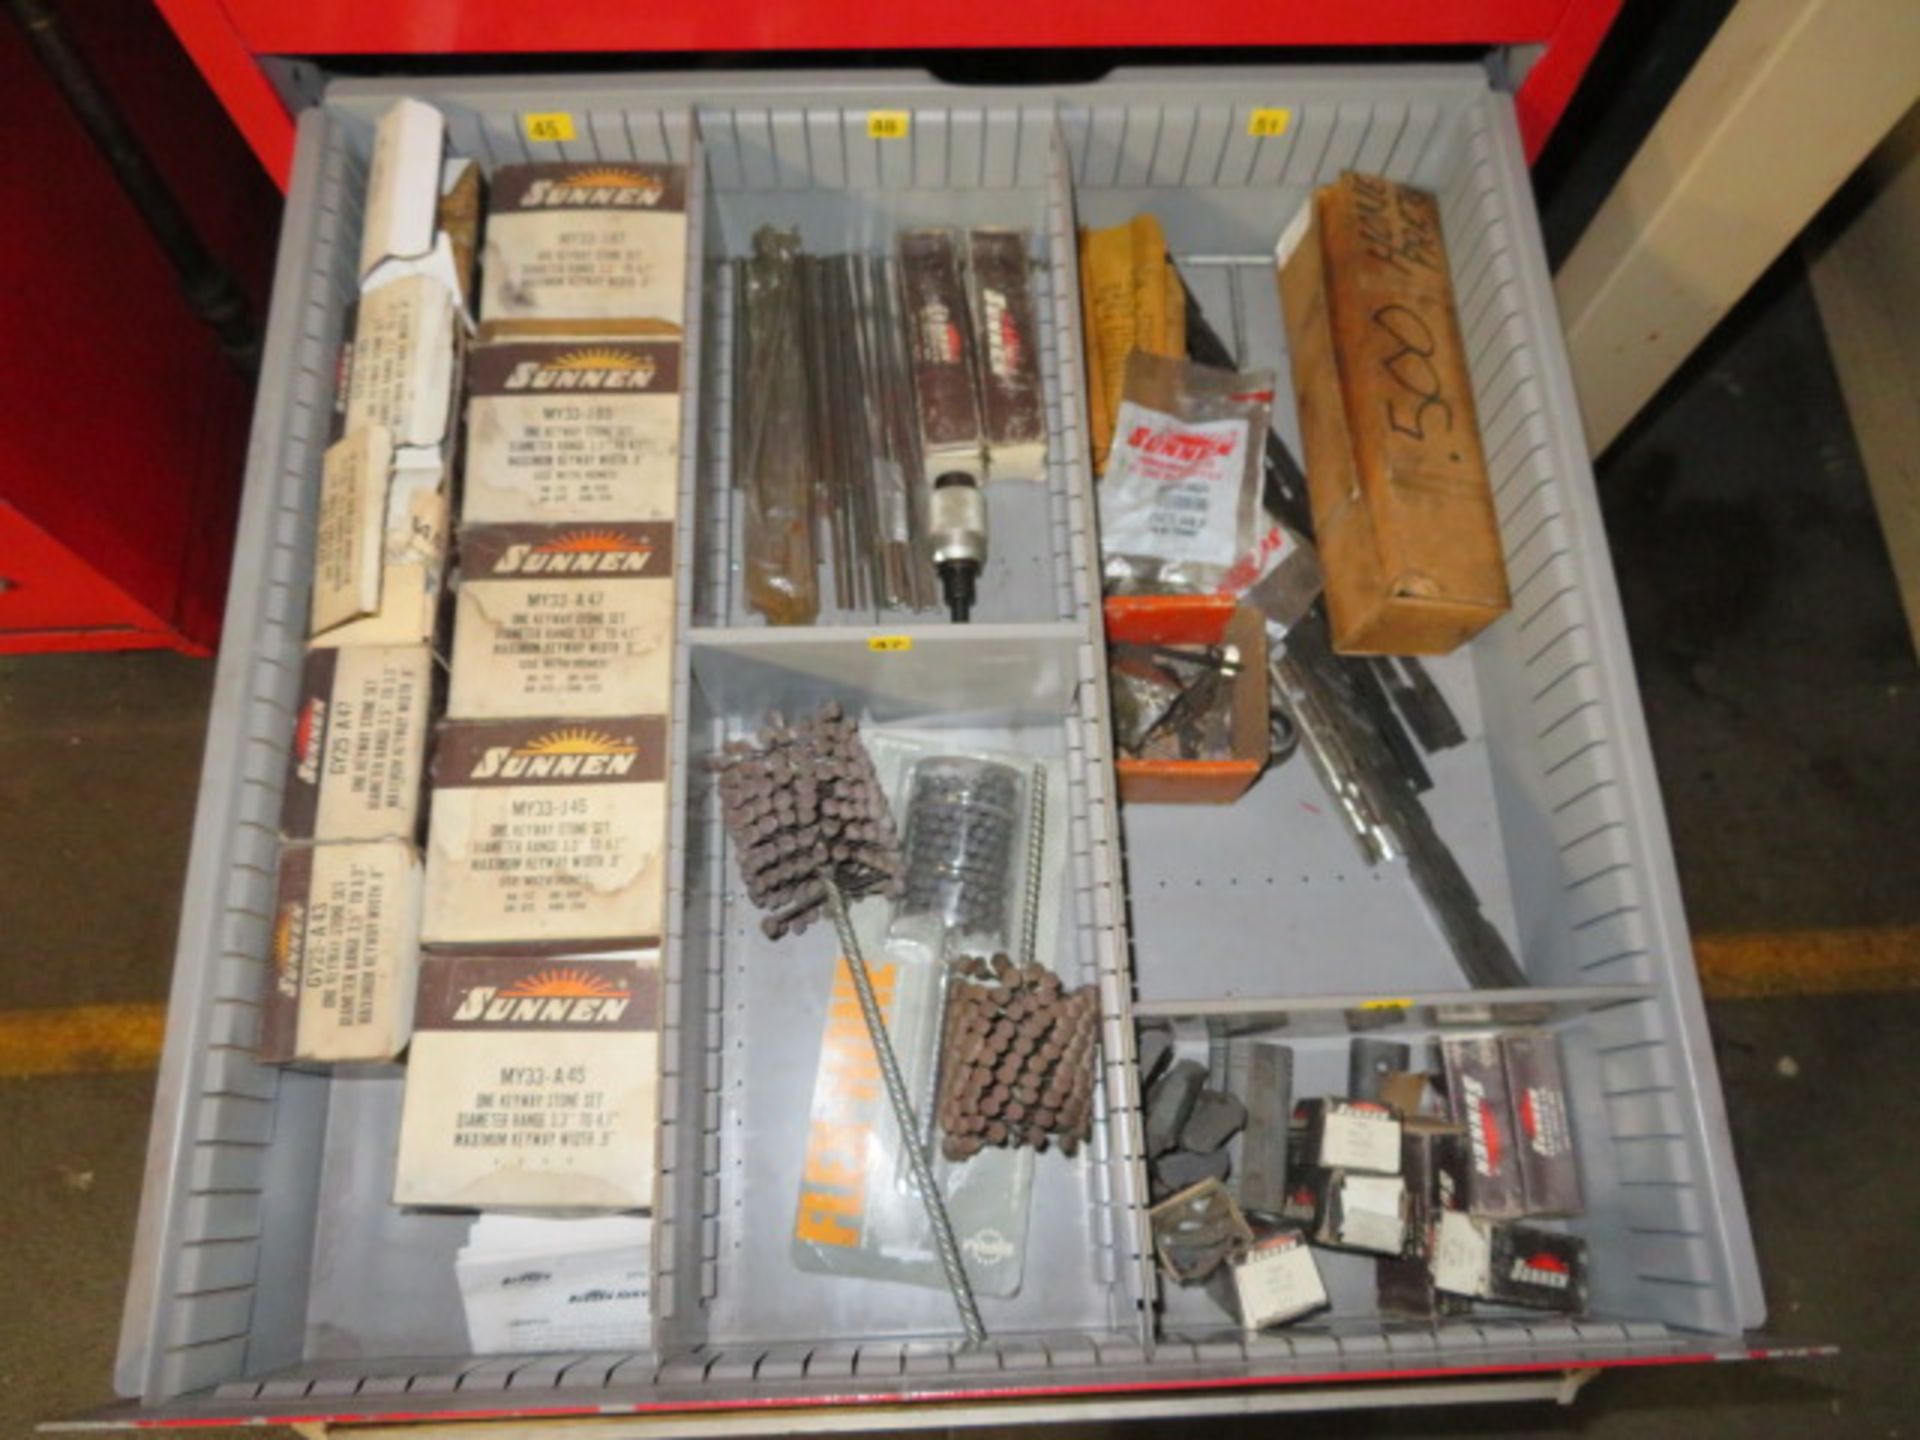 SUNNEN HONE TOOLS SUPPLIES IN (2) TOOL CABINETS ON RACK - Image 5 of 14